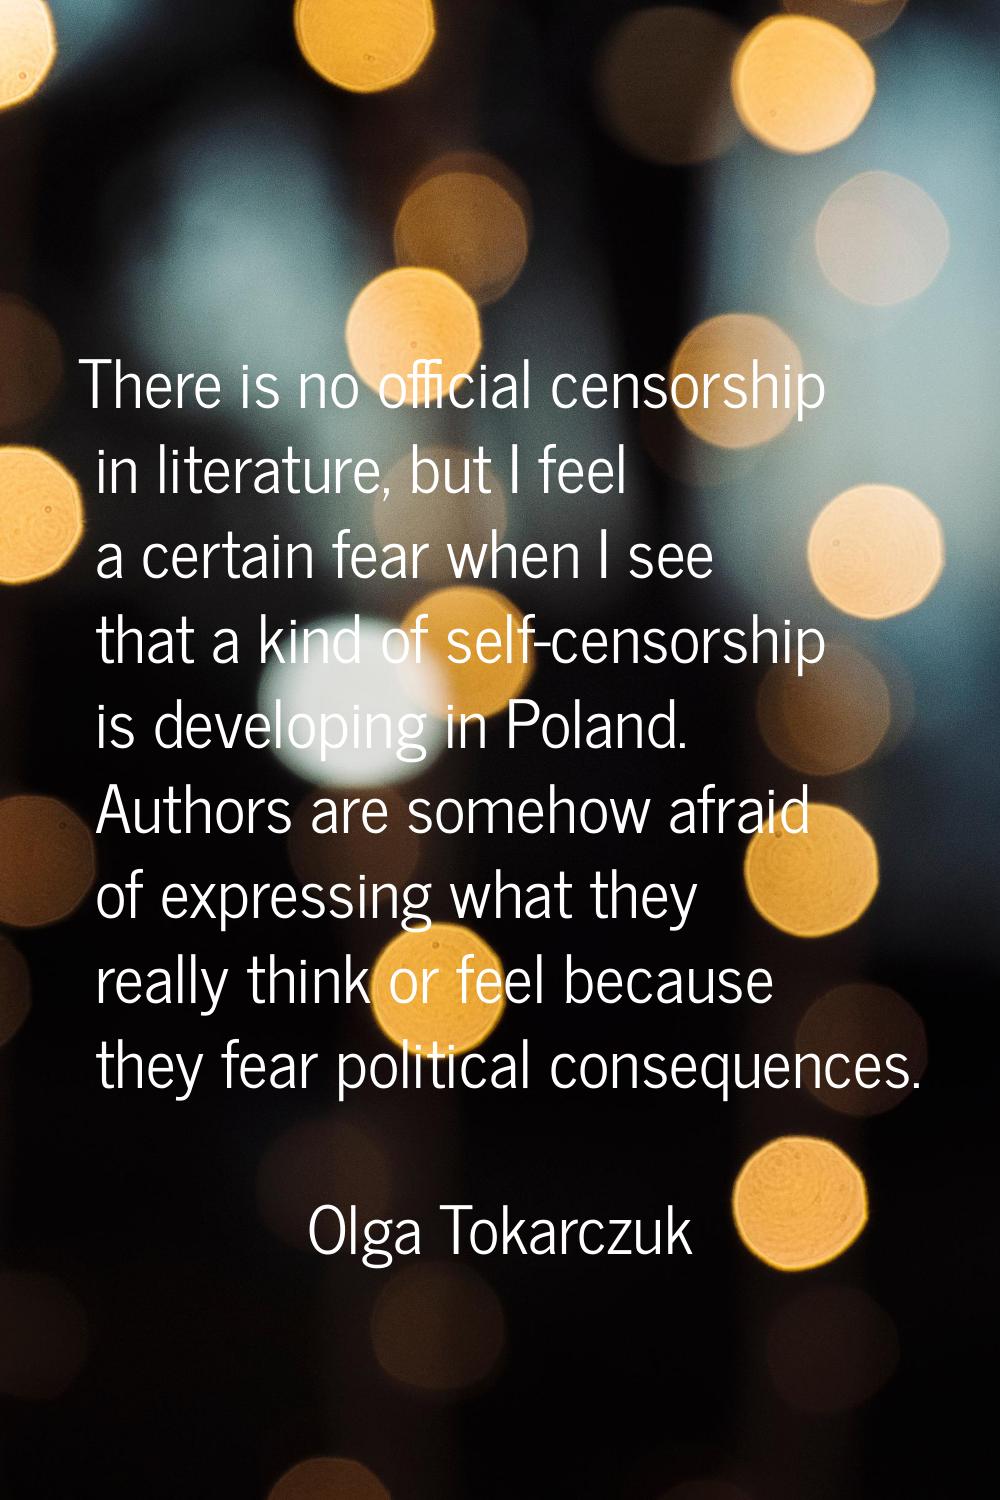 There is no official censorship in literature, but I feel a certain fear when I see that a kind of 